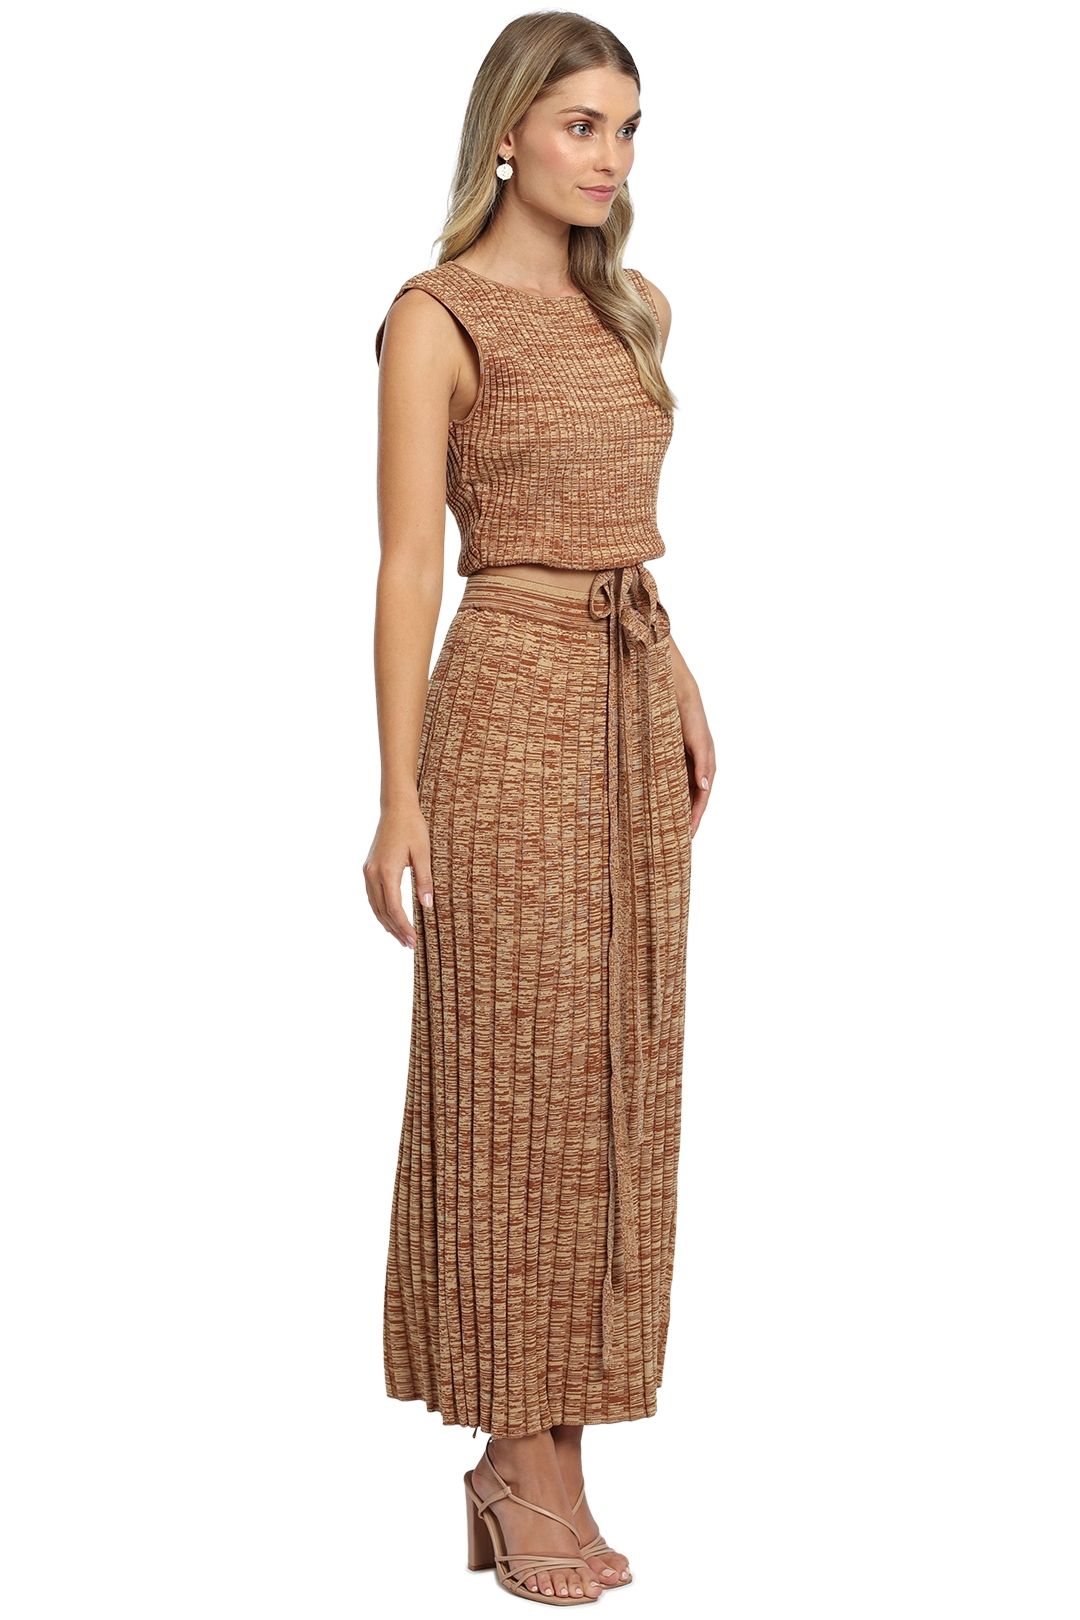 Ministry of Style Retrospective Knit Top and Skirt Set Copper